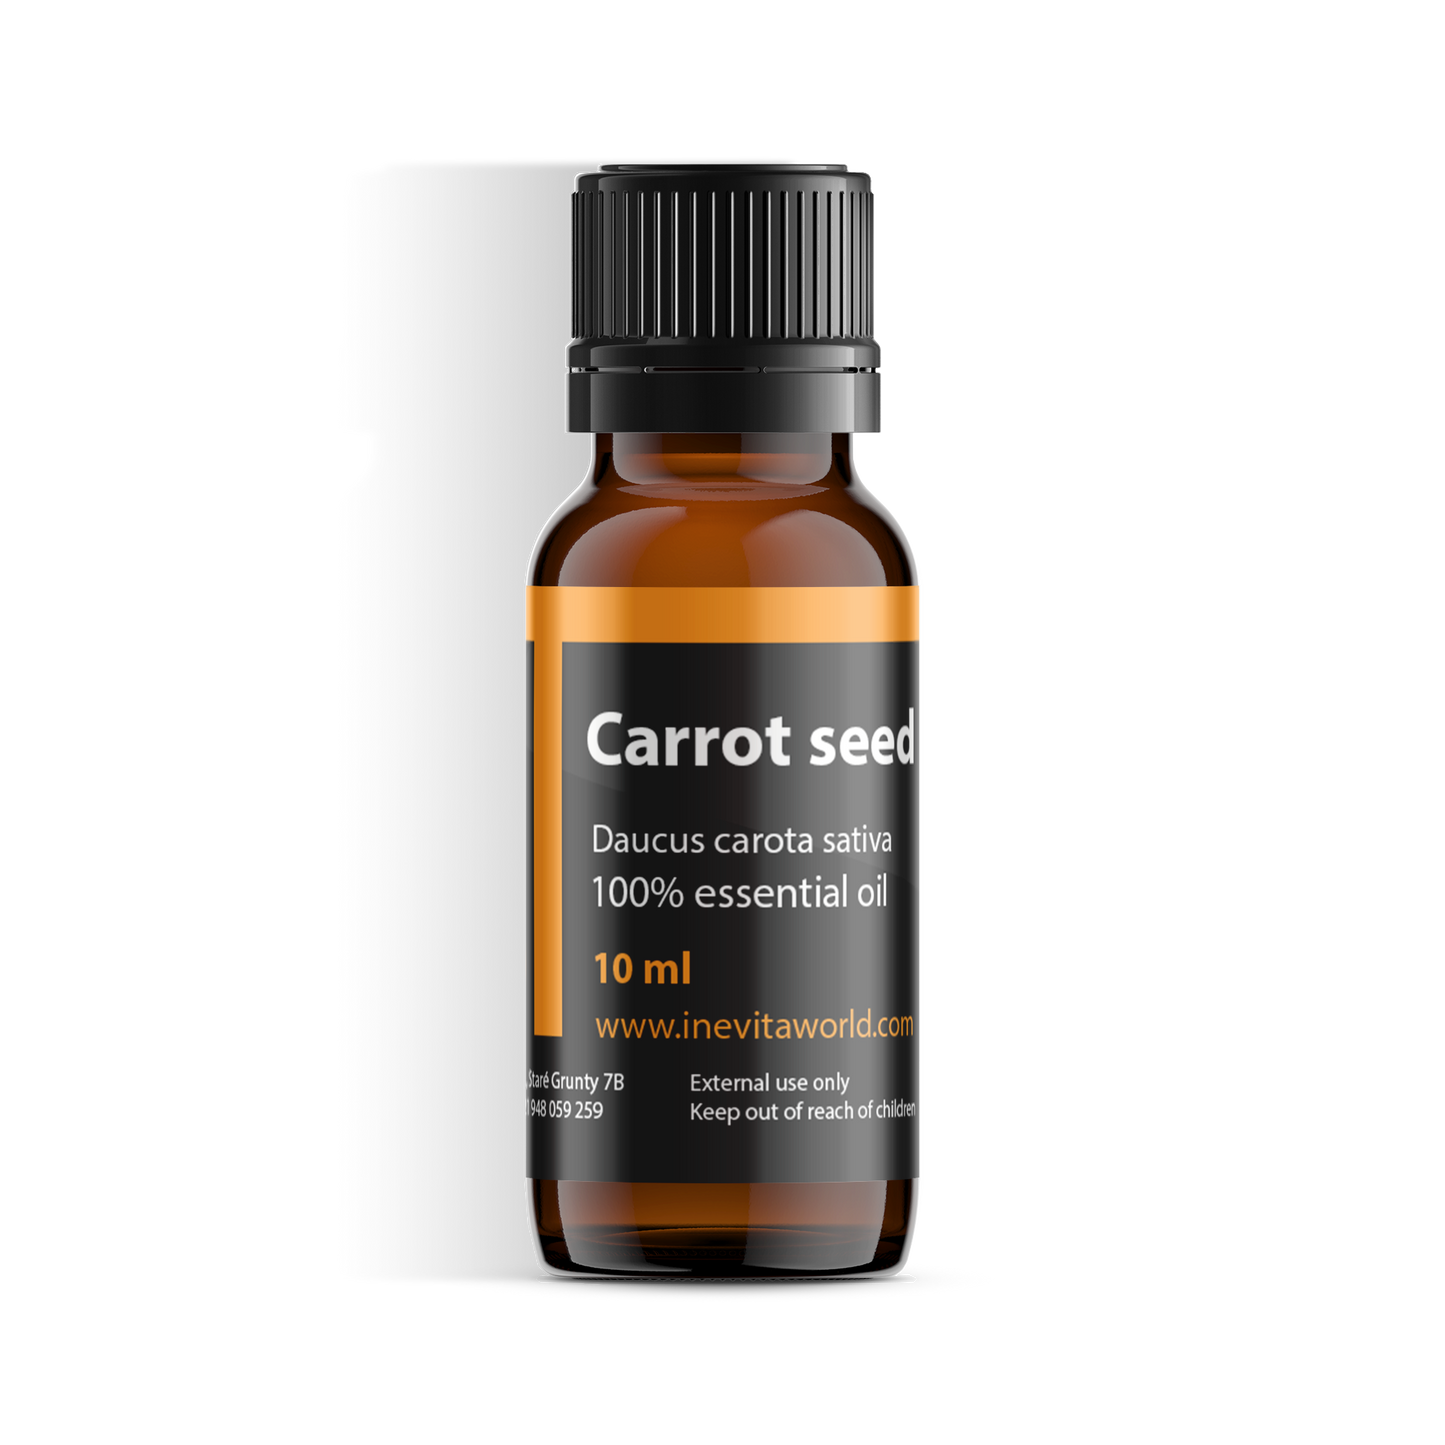 Carrot seed